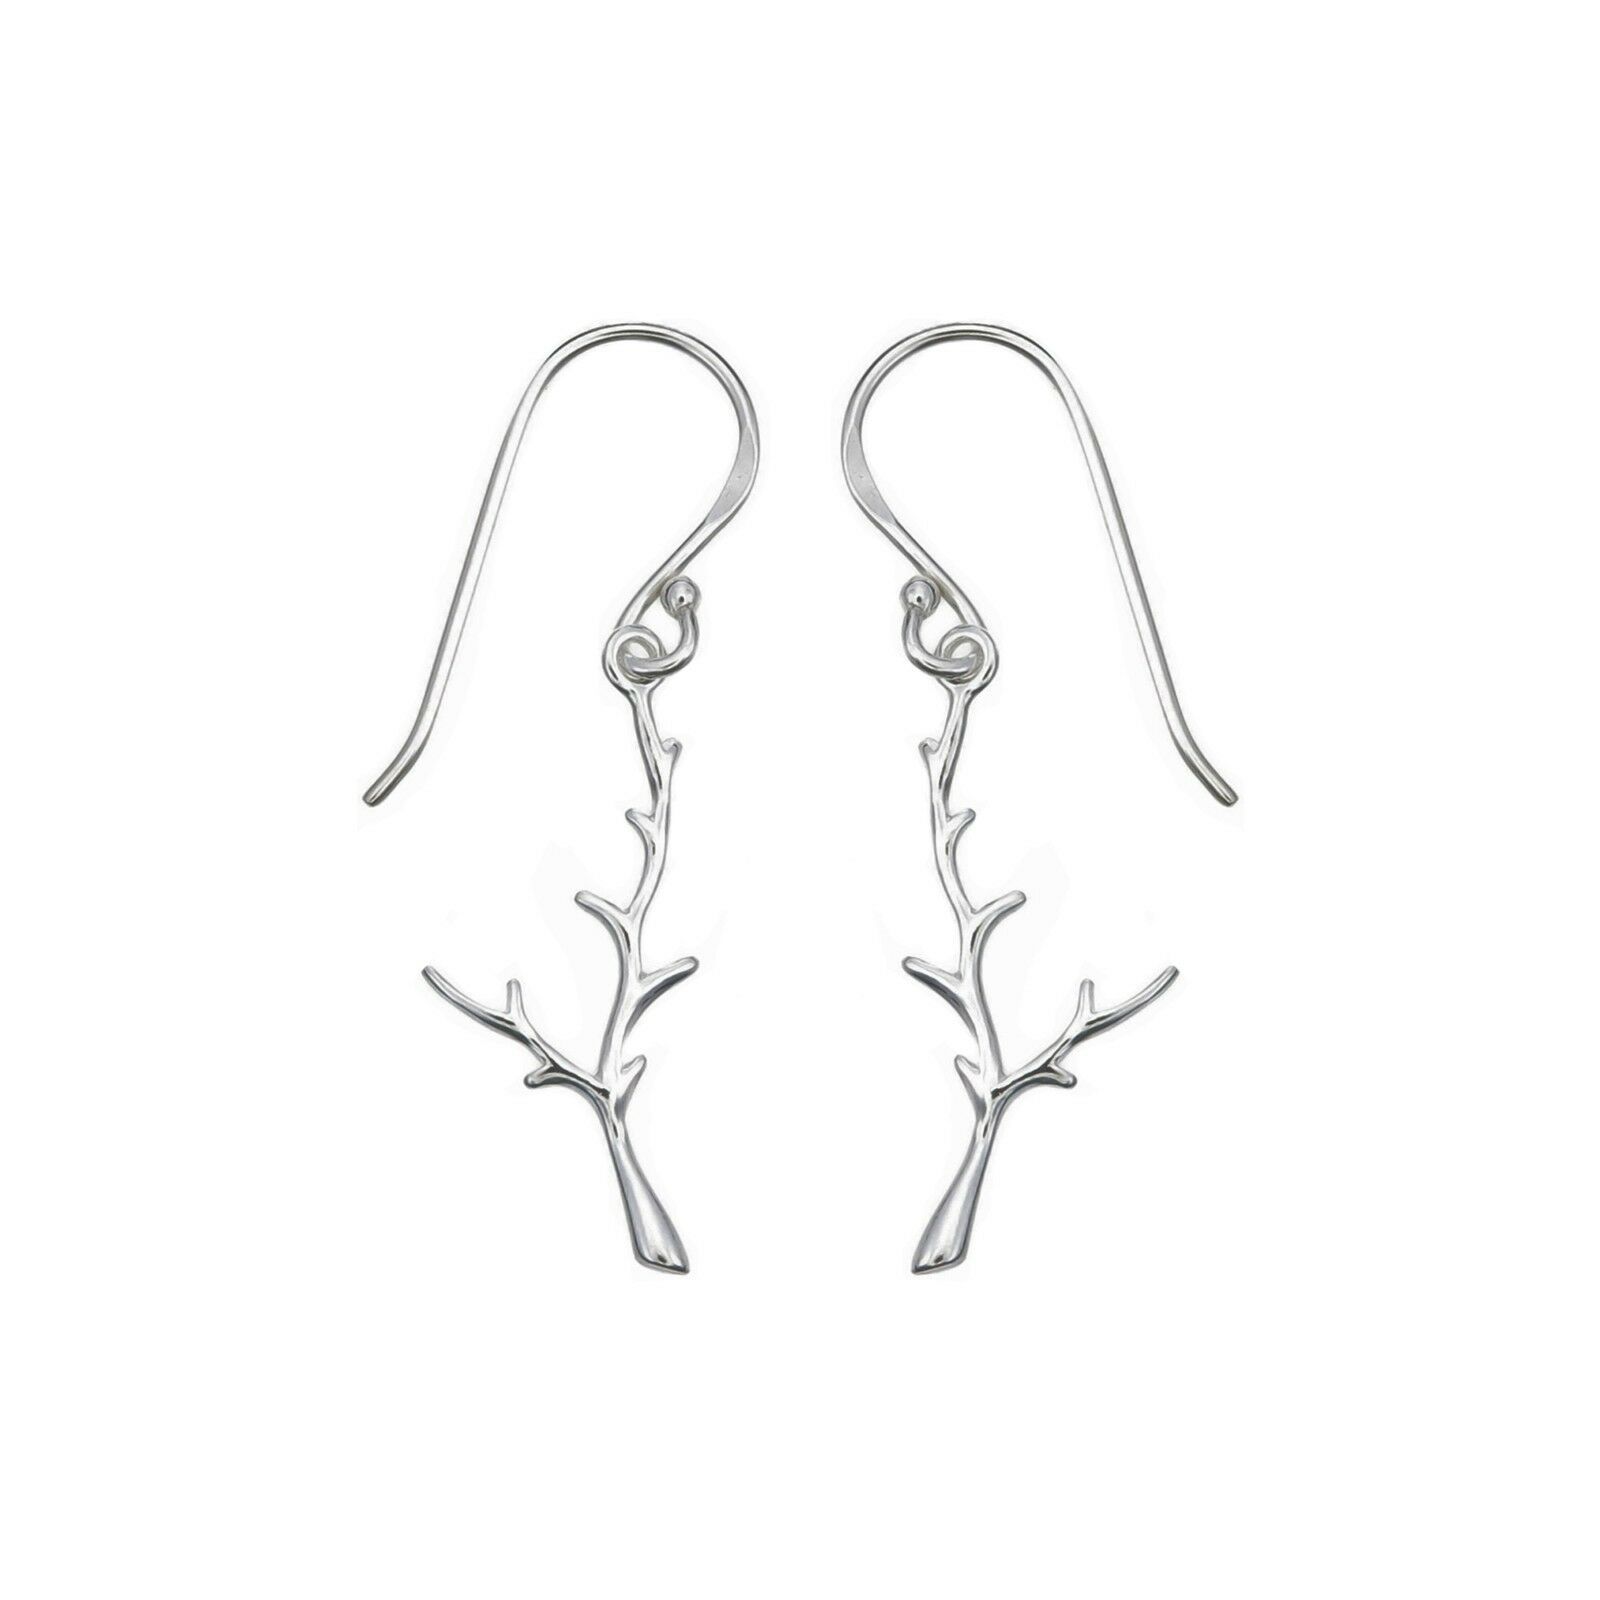 Primary image for 925 Sterling Silver Branch Drop Earrings for Women Gorgeous Designed Earrings